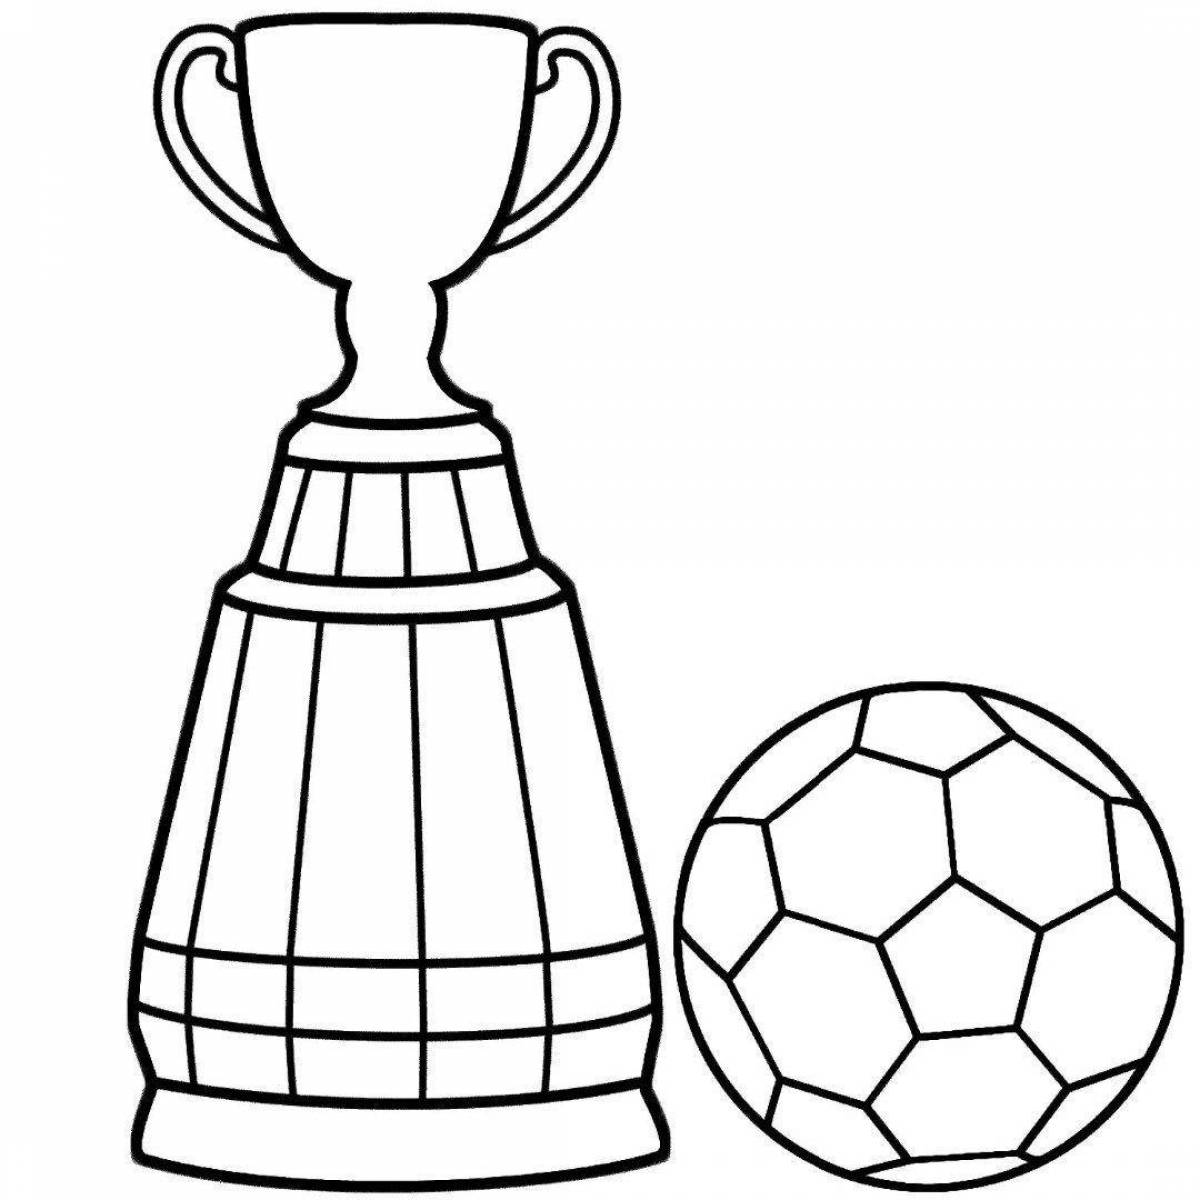 Great sports equipment coloring page